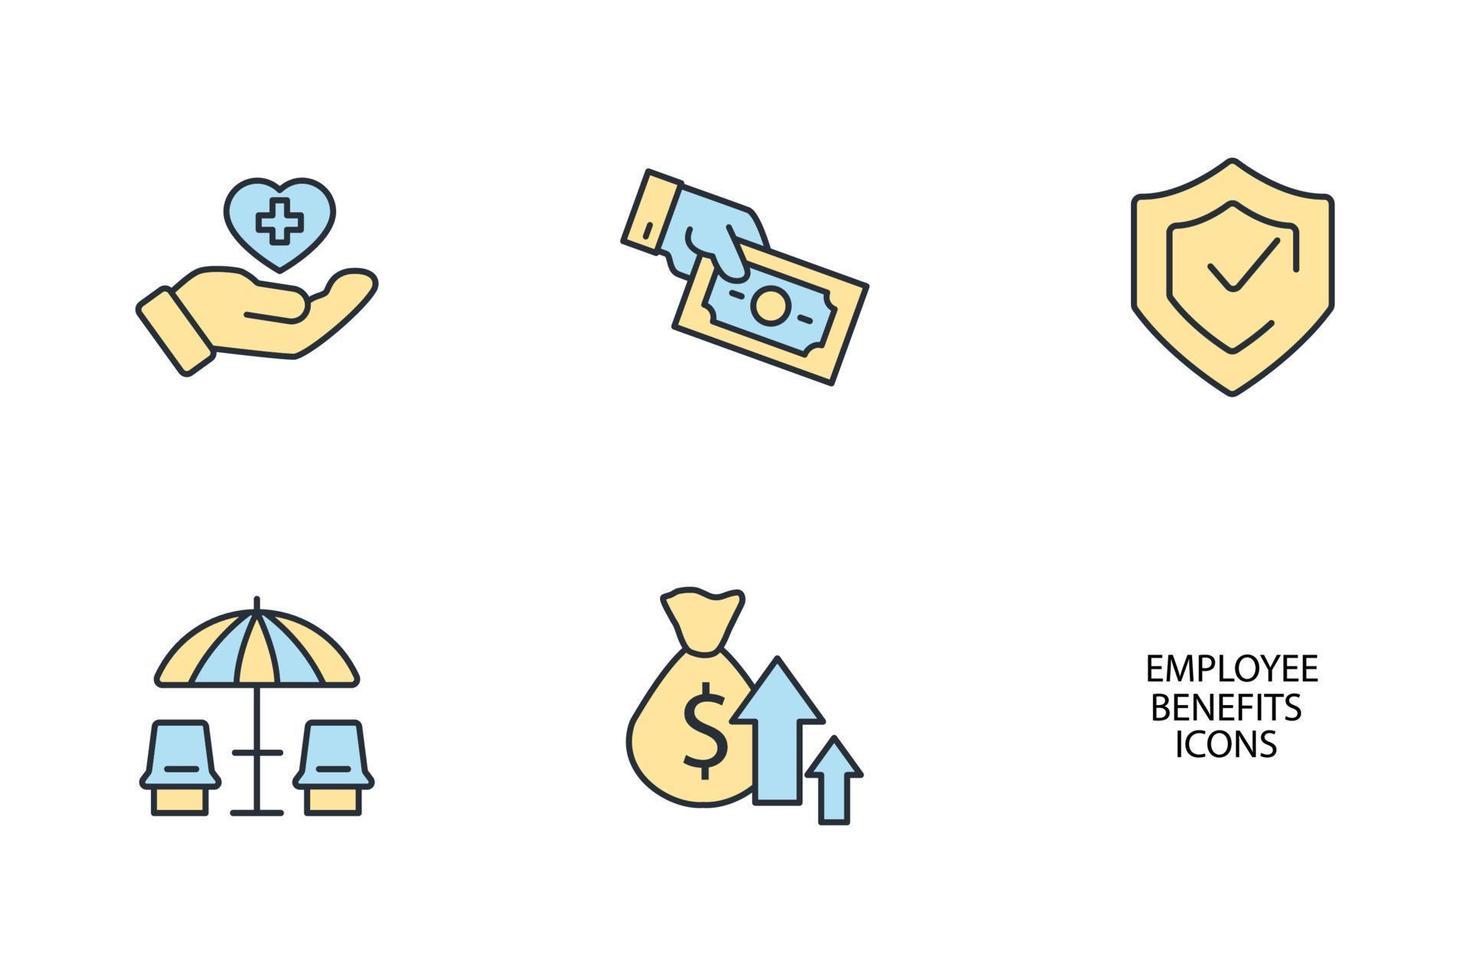 Employee Benefits icons set .   Employee Benefits pack symbol vector elements for infographic web